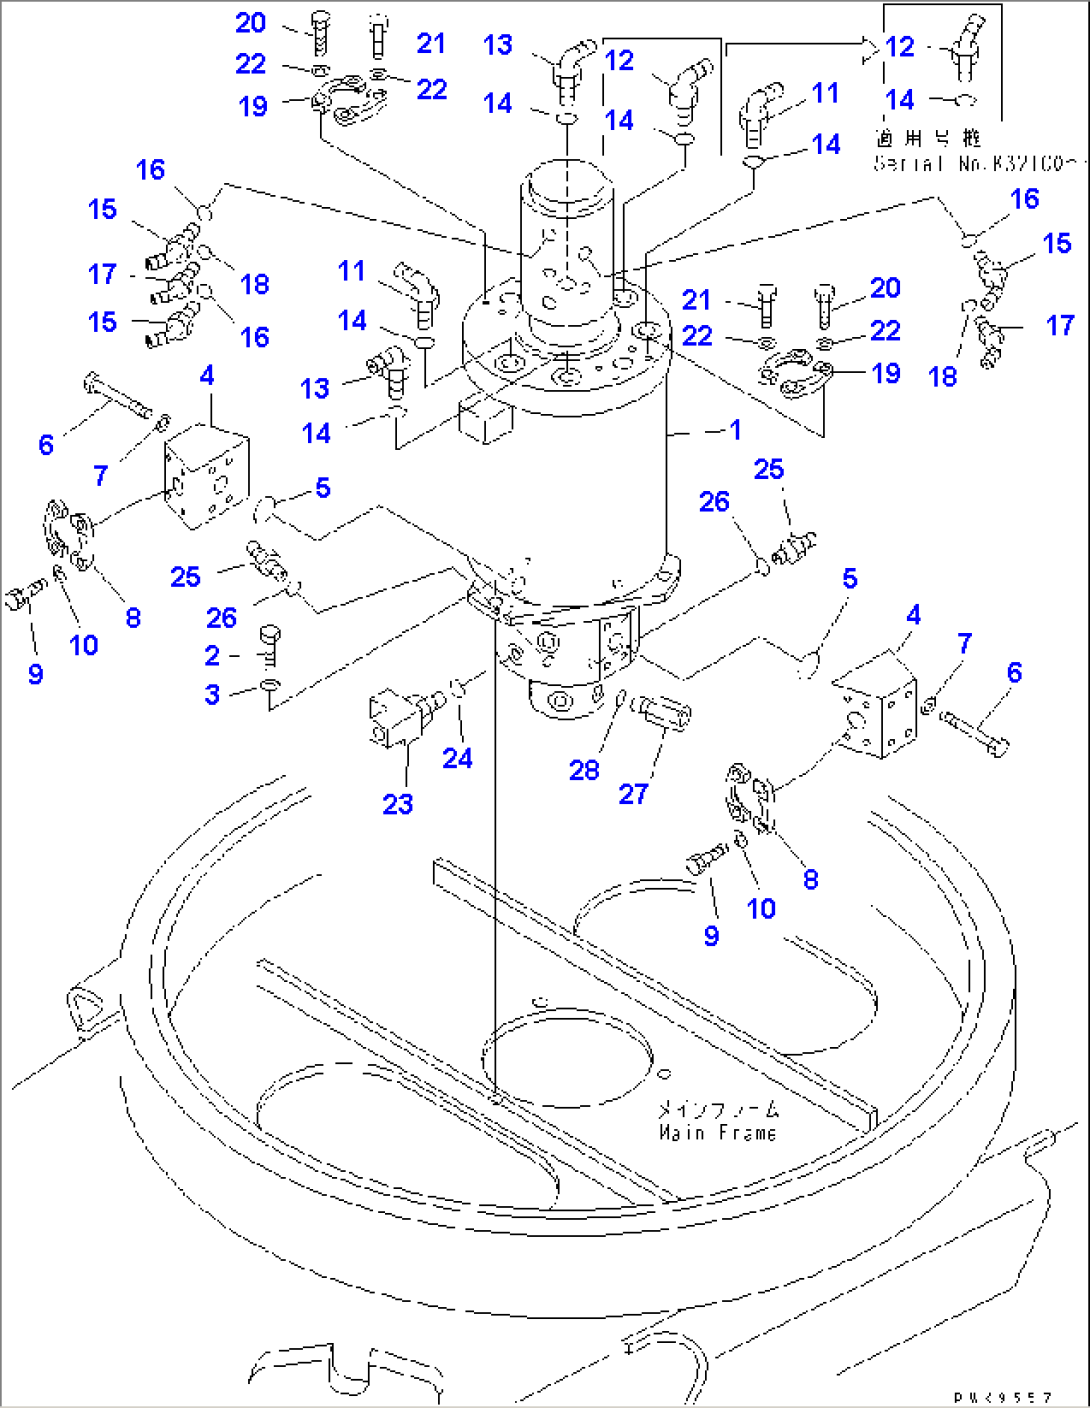 SWIVEL JOINT AND RELATED PARTS(#K32001-)